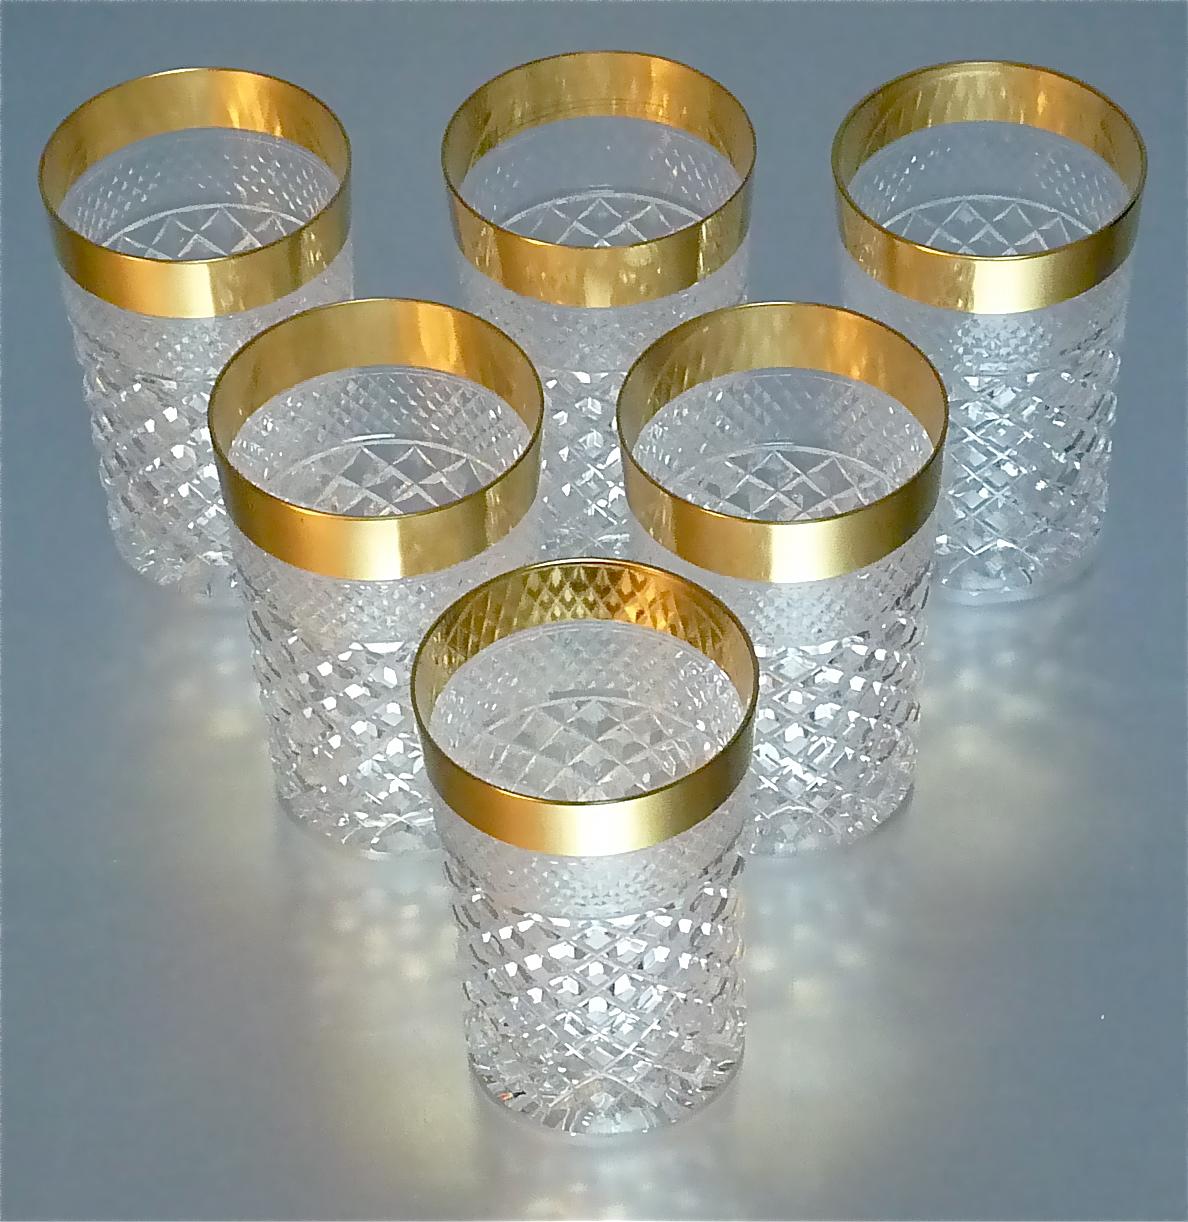 Gorgeous 20th century handcrafted faceted crystal glass set with 24-carat gold rim made by Josephinenhuette Moser circa 1960-1970 and very in the style of the exclusive French company Baccarat or Saint Louis thistle. This exquisite set of 6 water